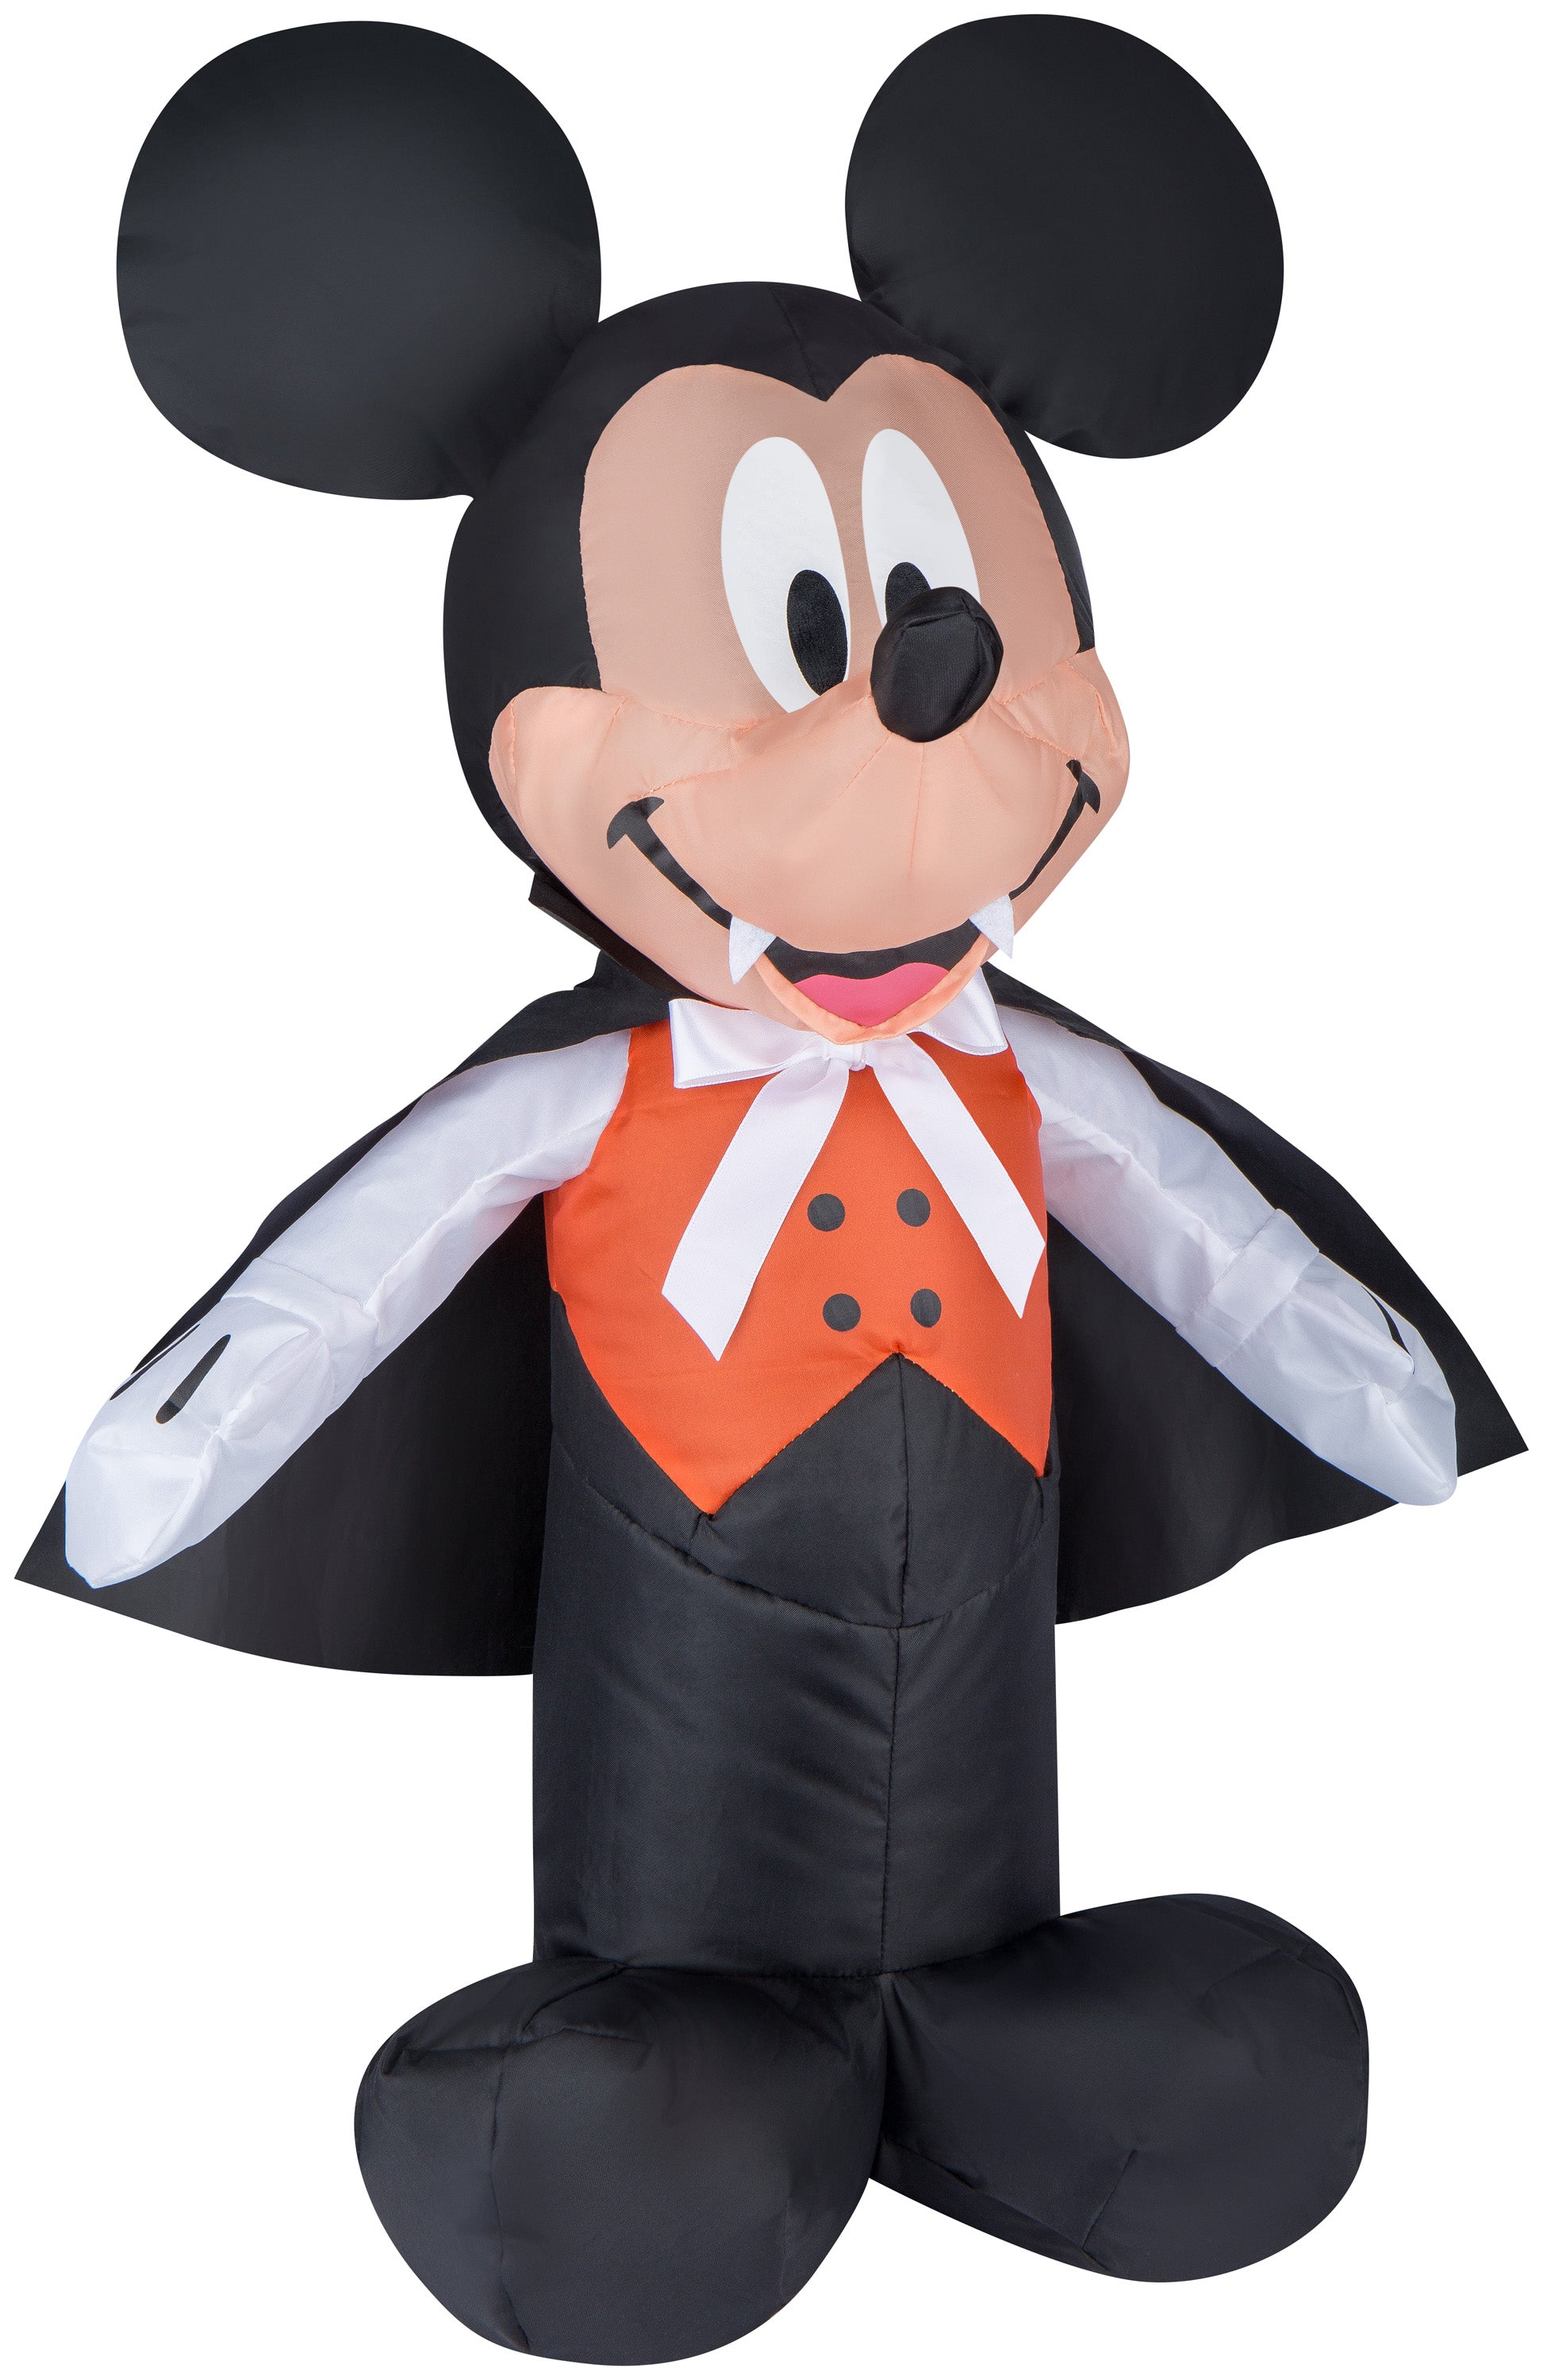 Gemmy Airdorable Airblown Mickey Mouse Disney, 1.5 ft Tall, Multicolored